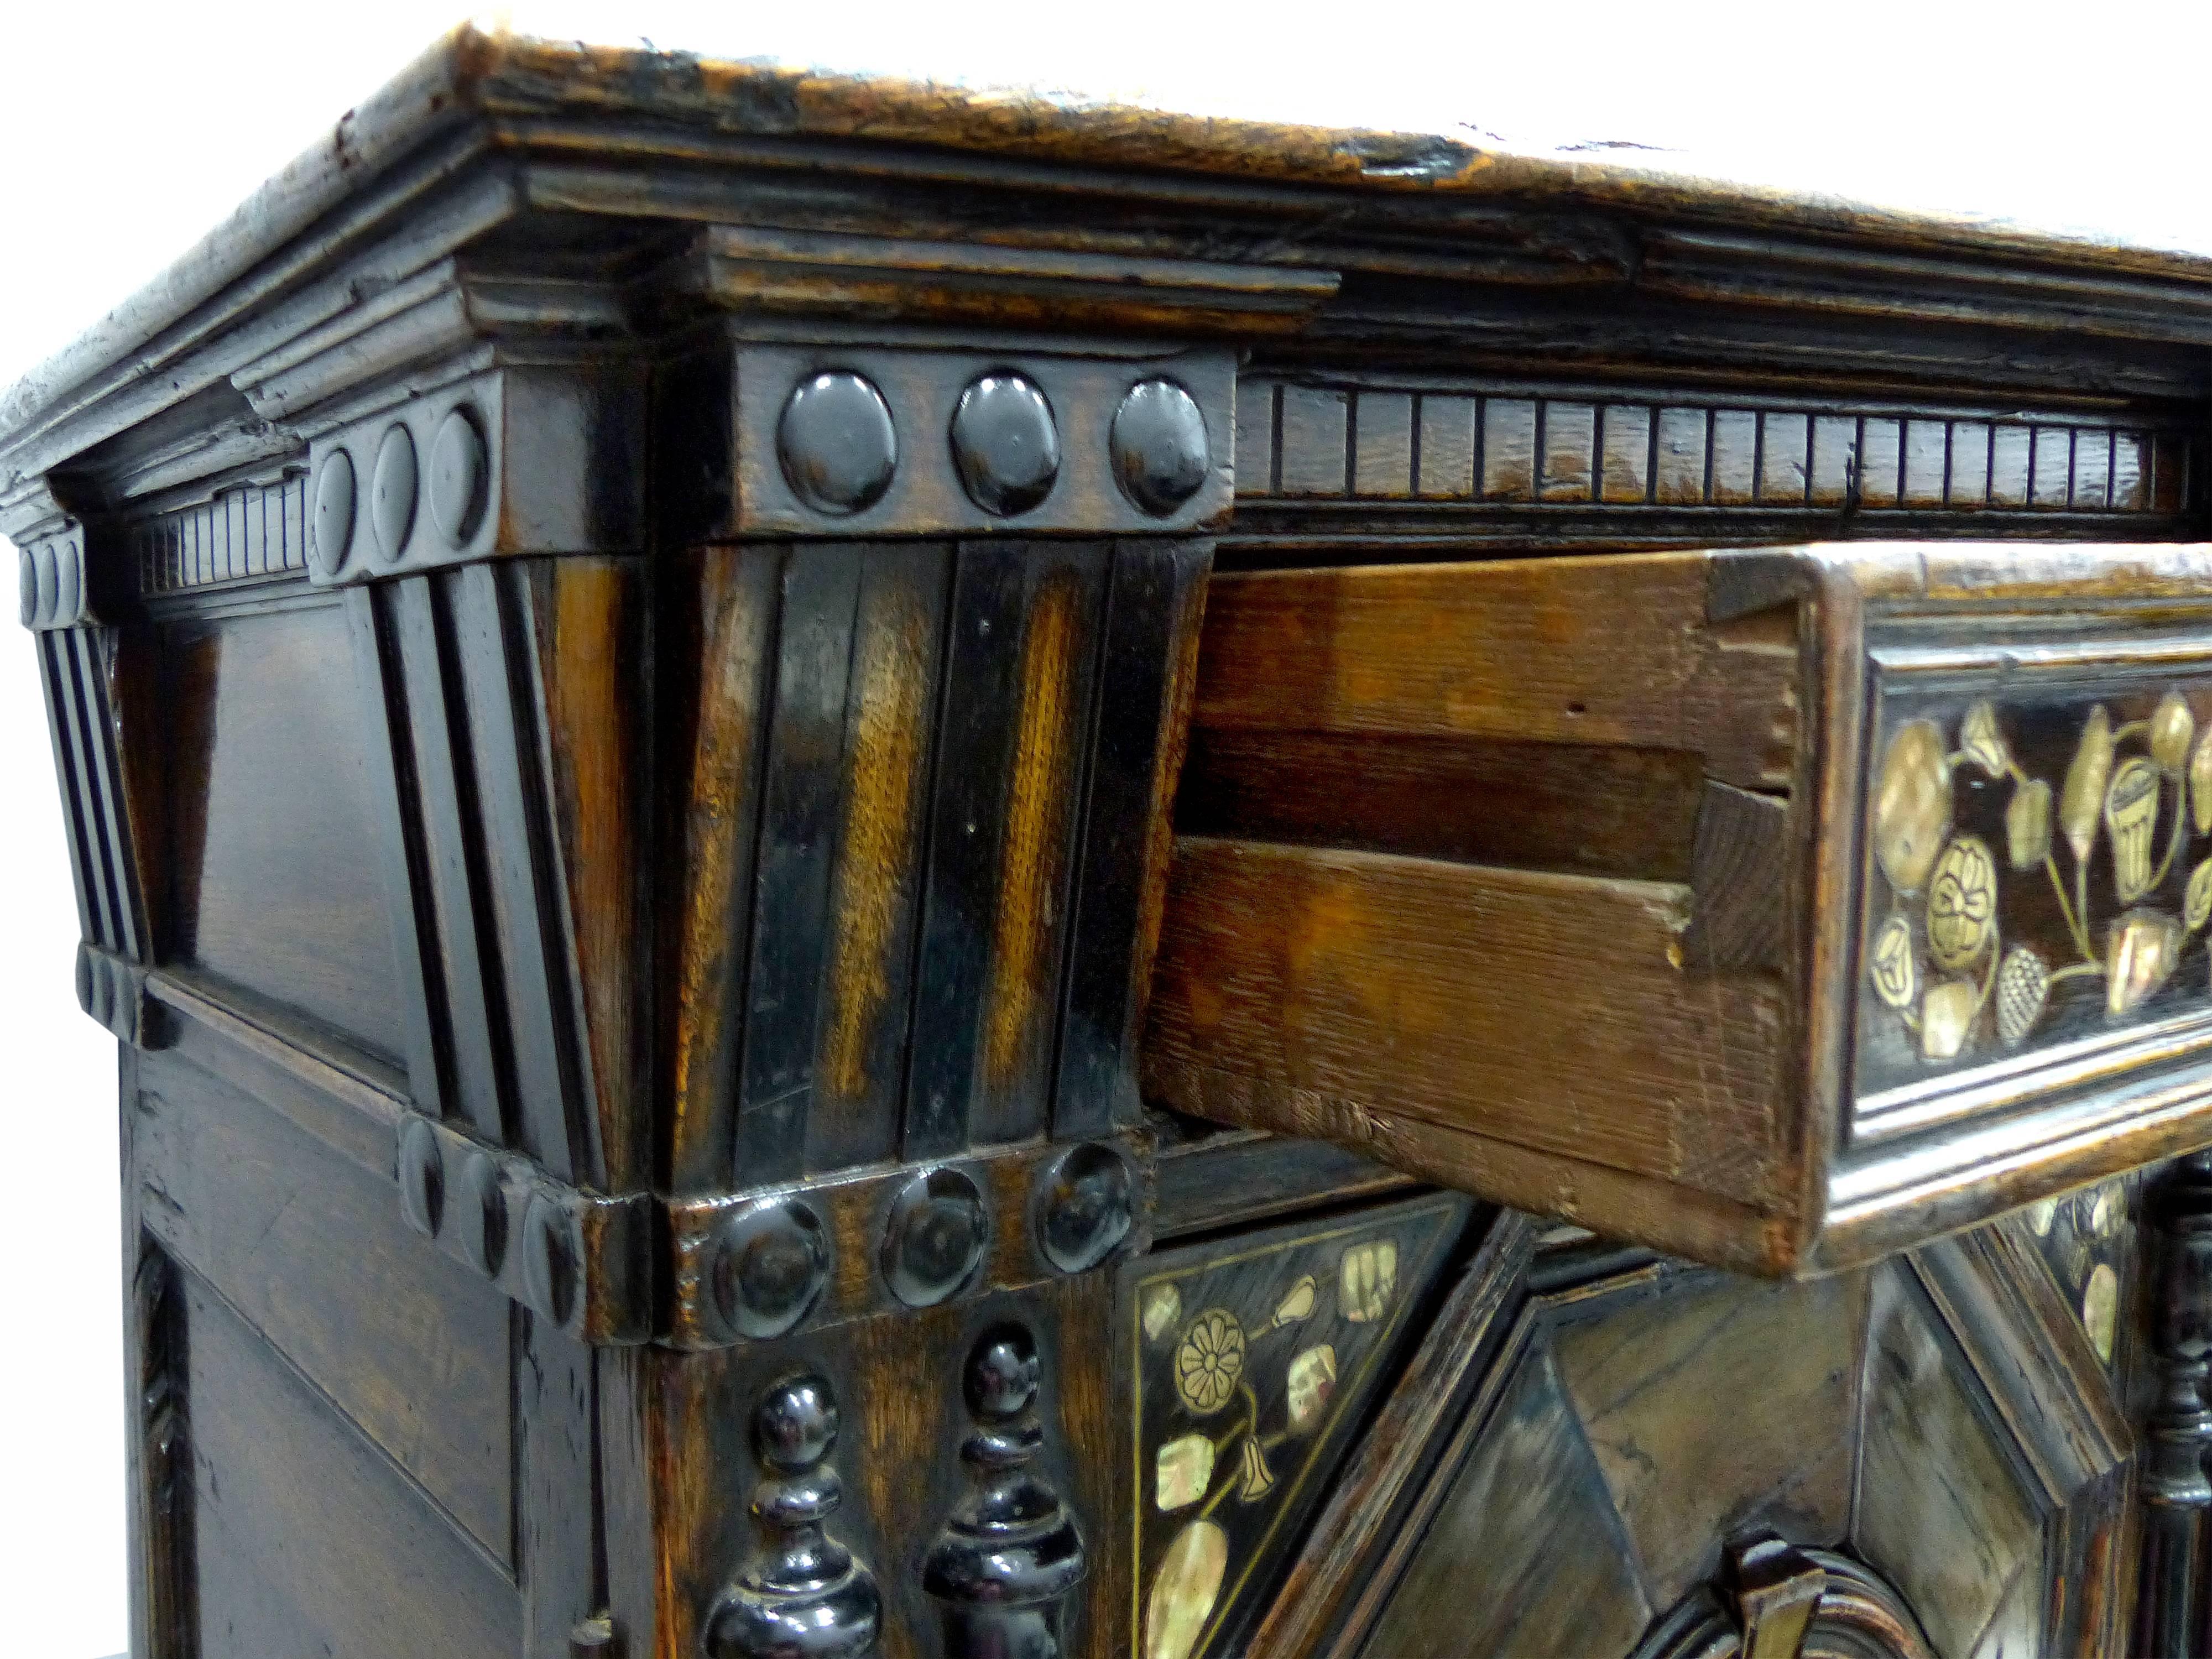 17th Century Restoration Charles II English Cabinet circa 1660-1685, Mother-of-Pearl Inlays